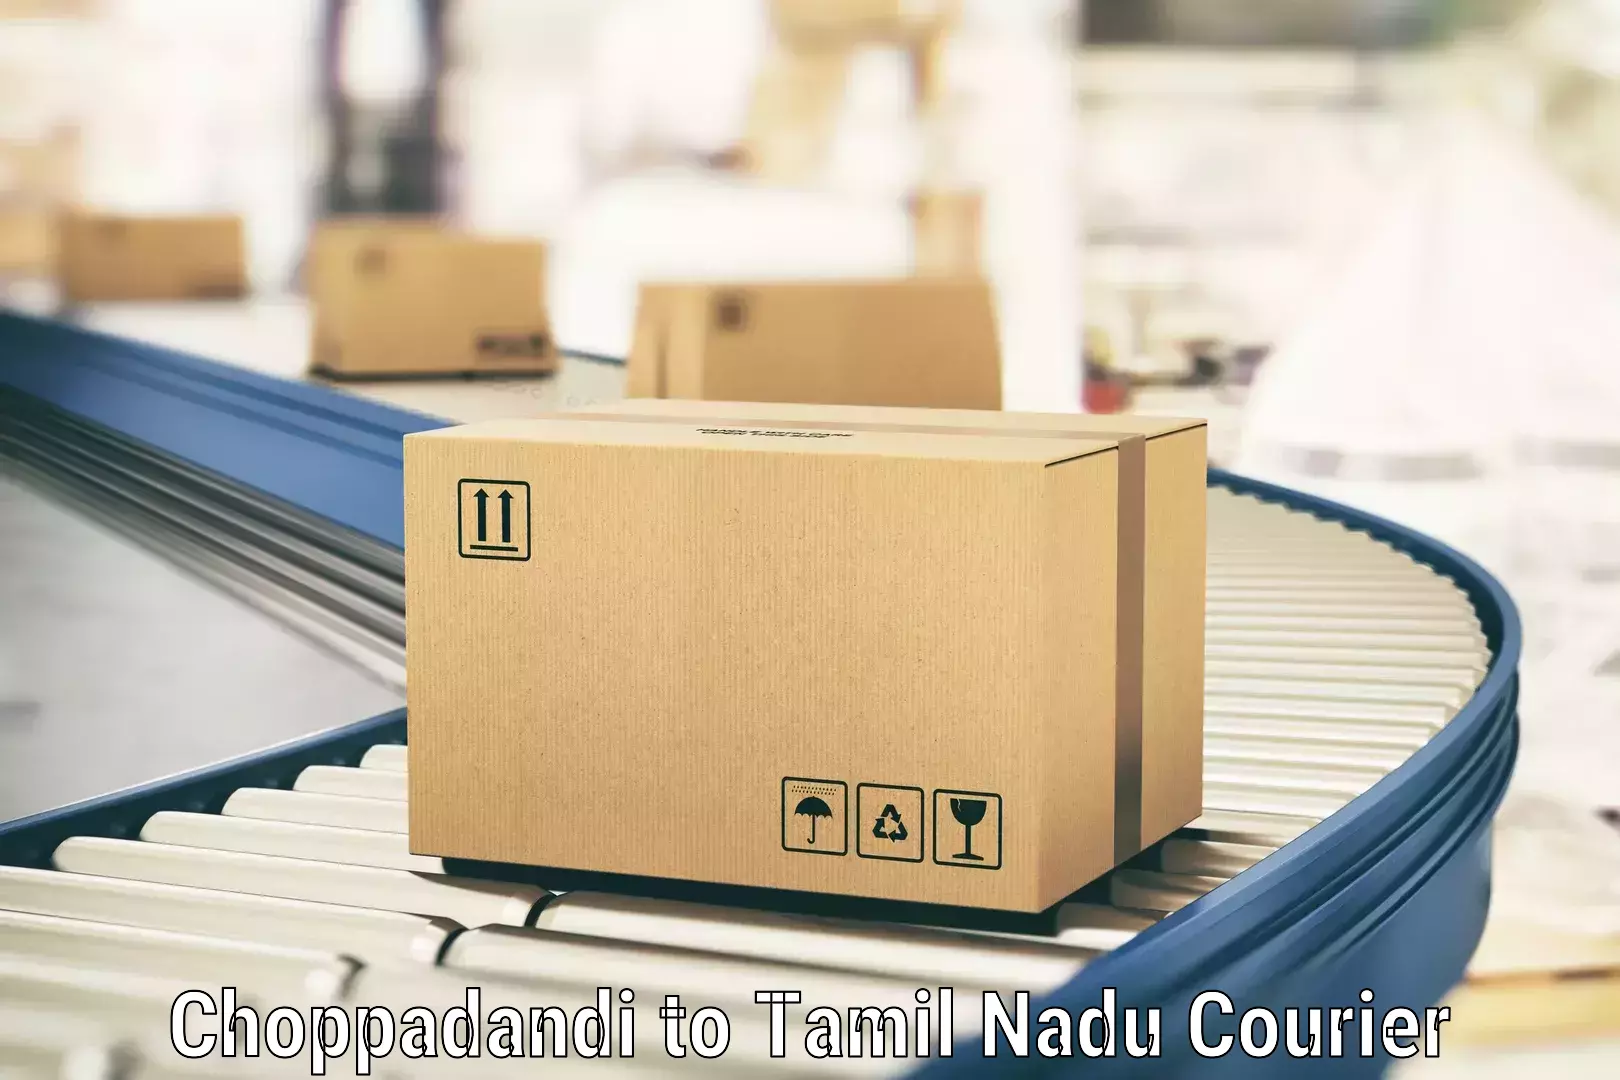 Secure package delivery Choppadandi to Vellore Institute of Technology